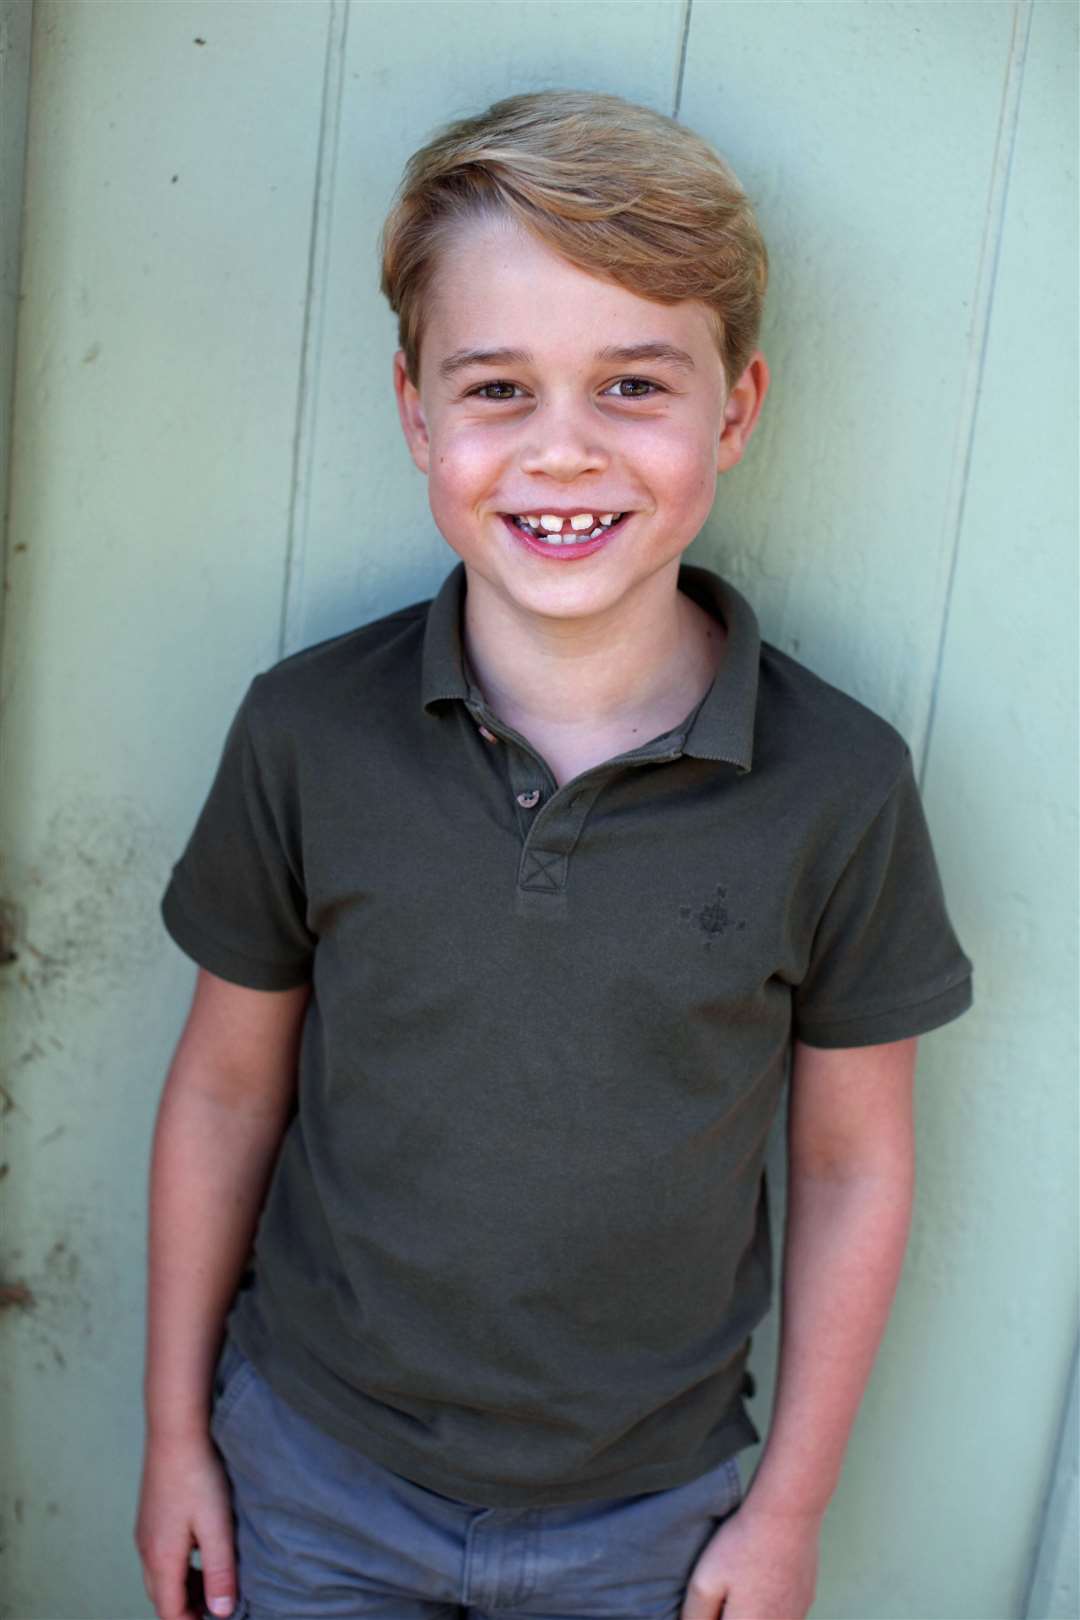 George, photographed by Kate, for his seventh birthday photos (Duchess of Cambridge/PA)